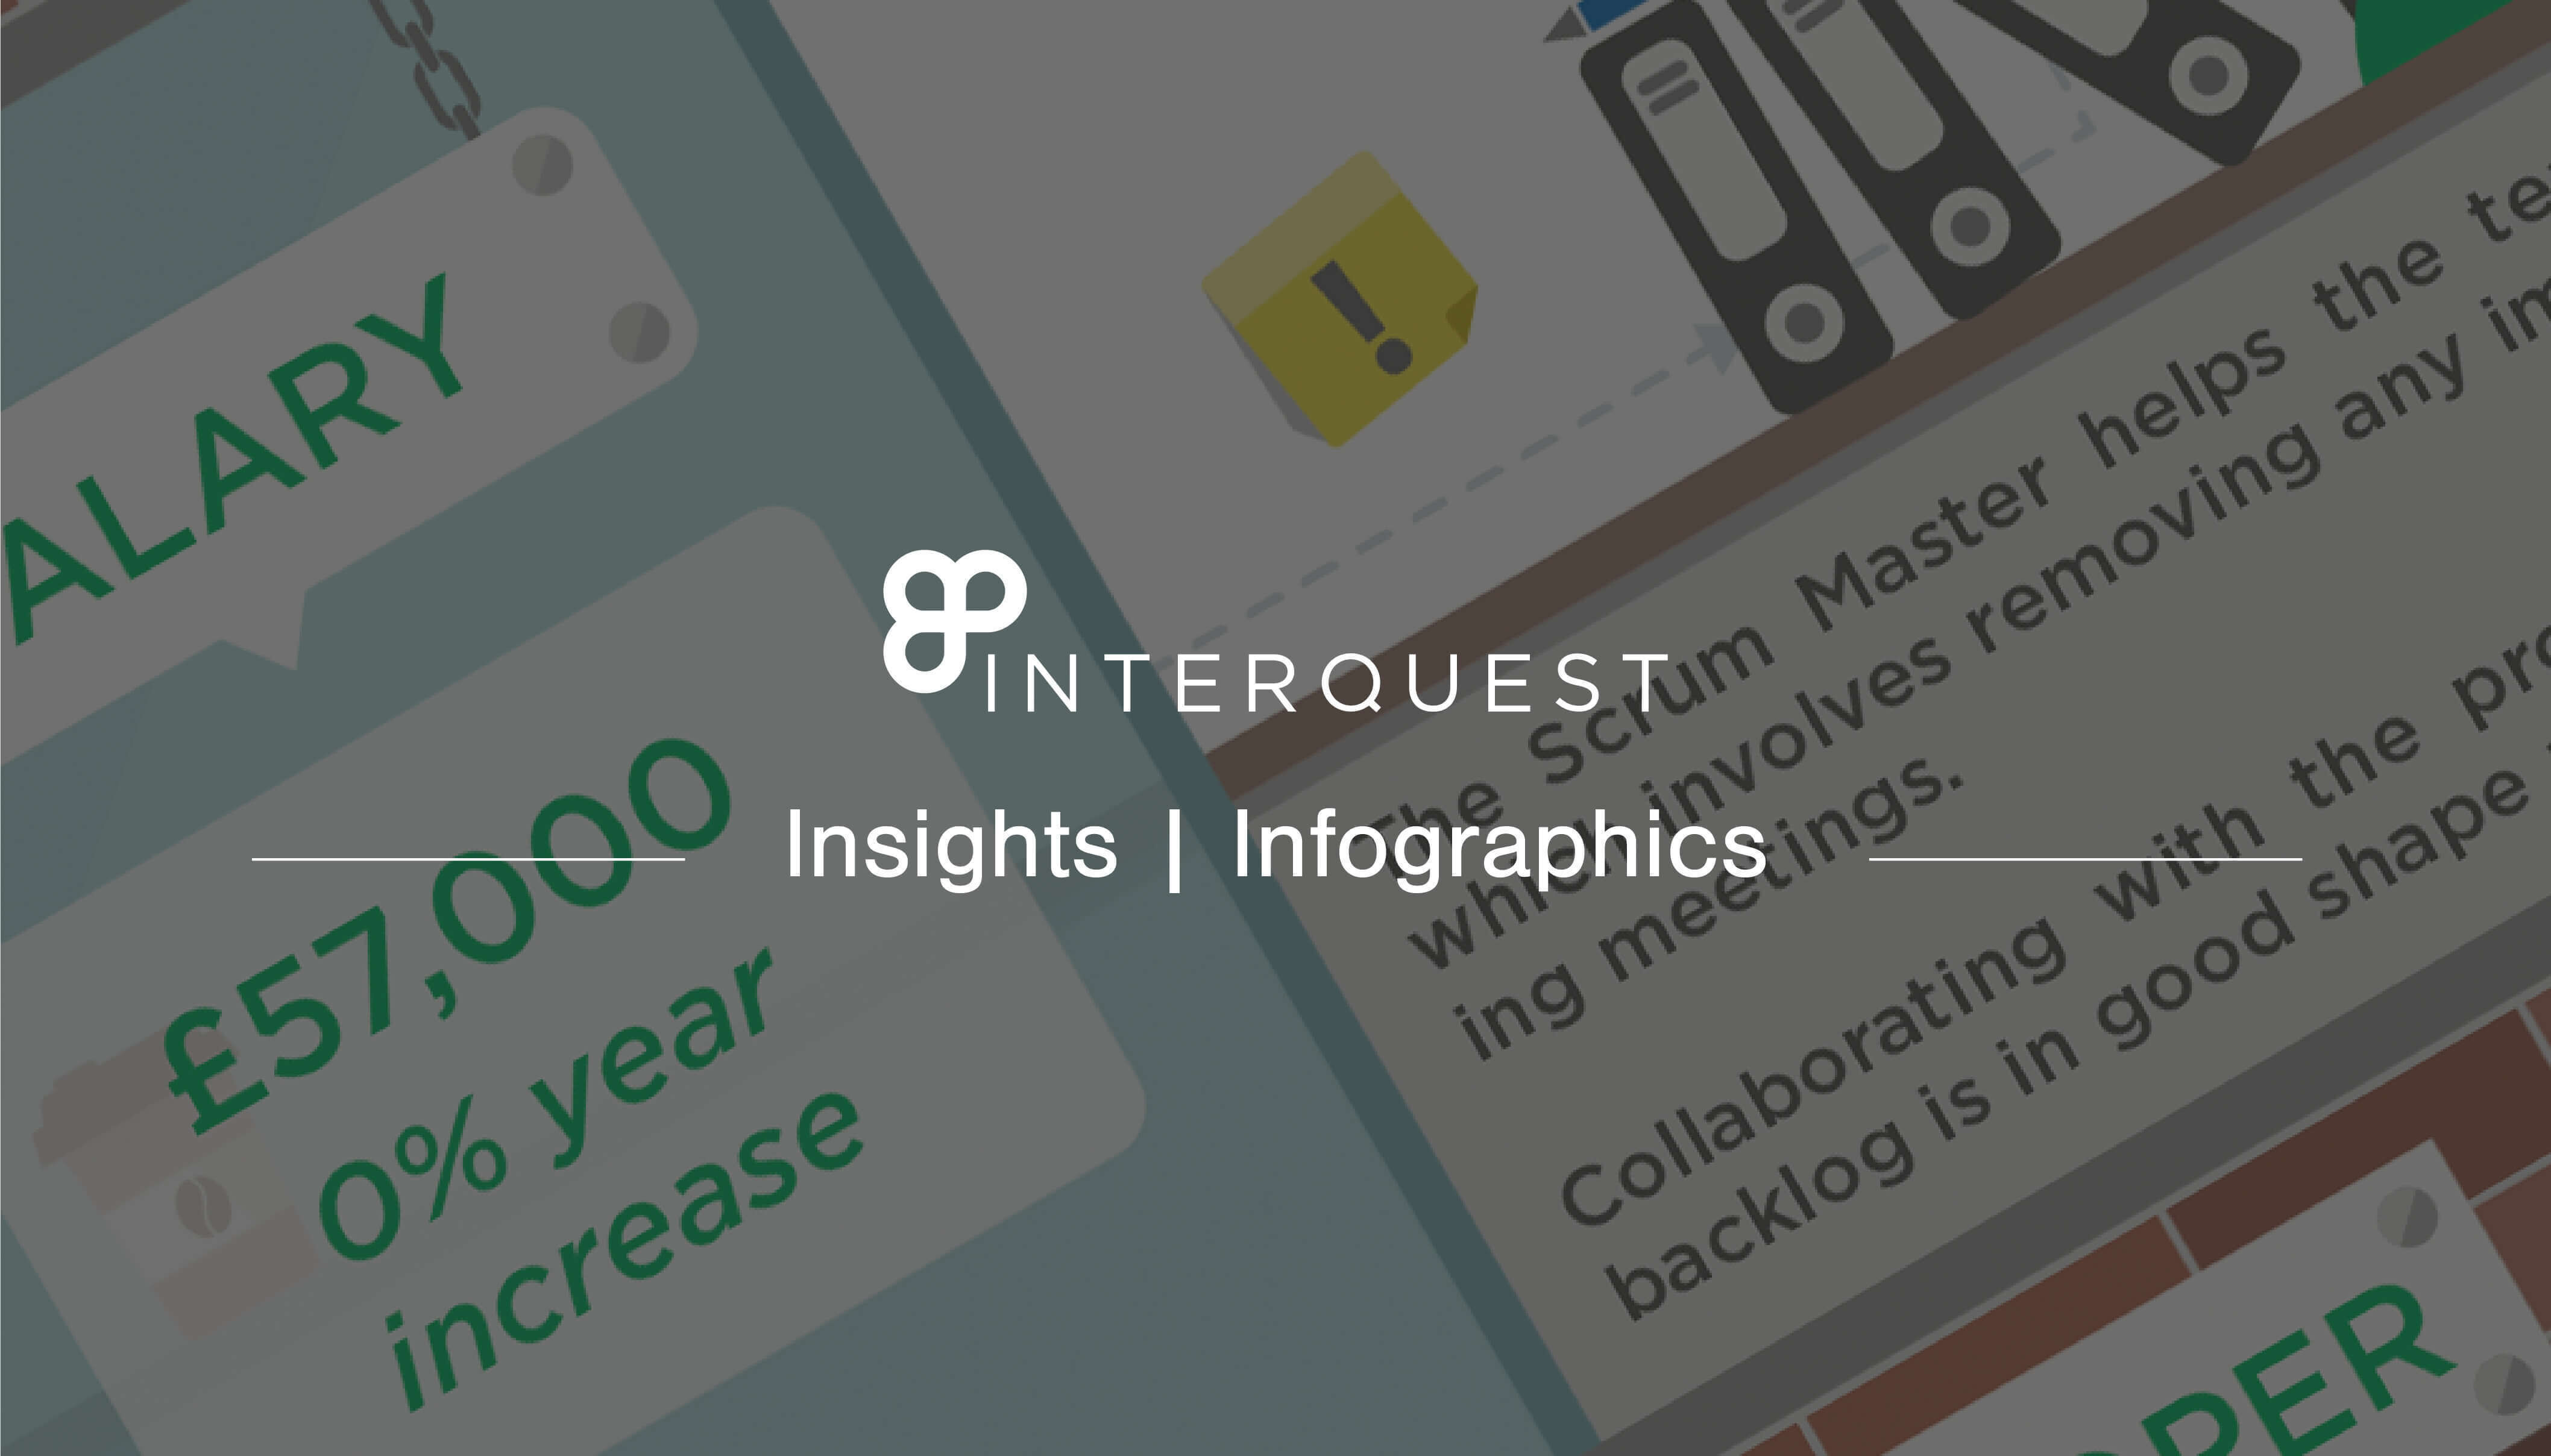 inter quest insights infographics banner